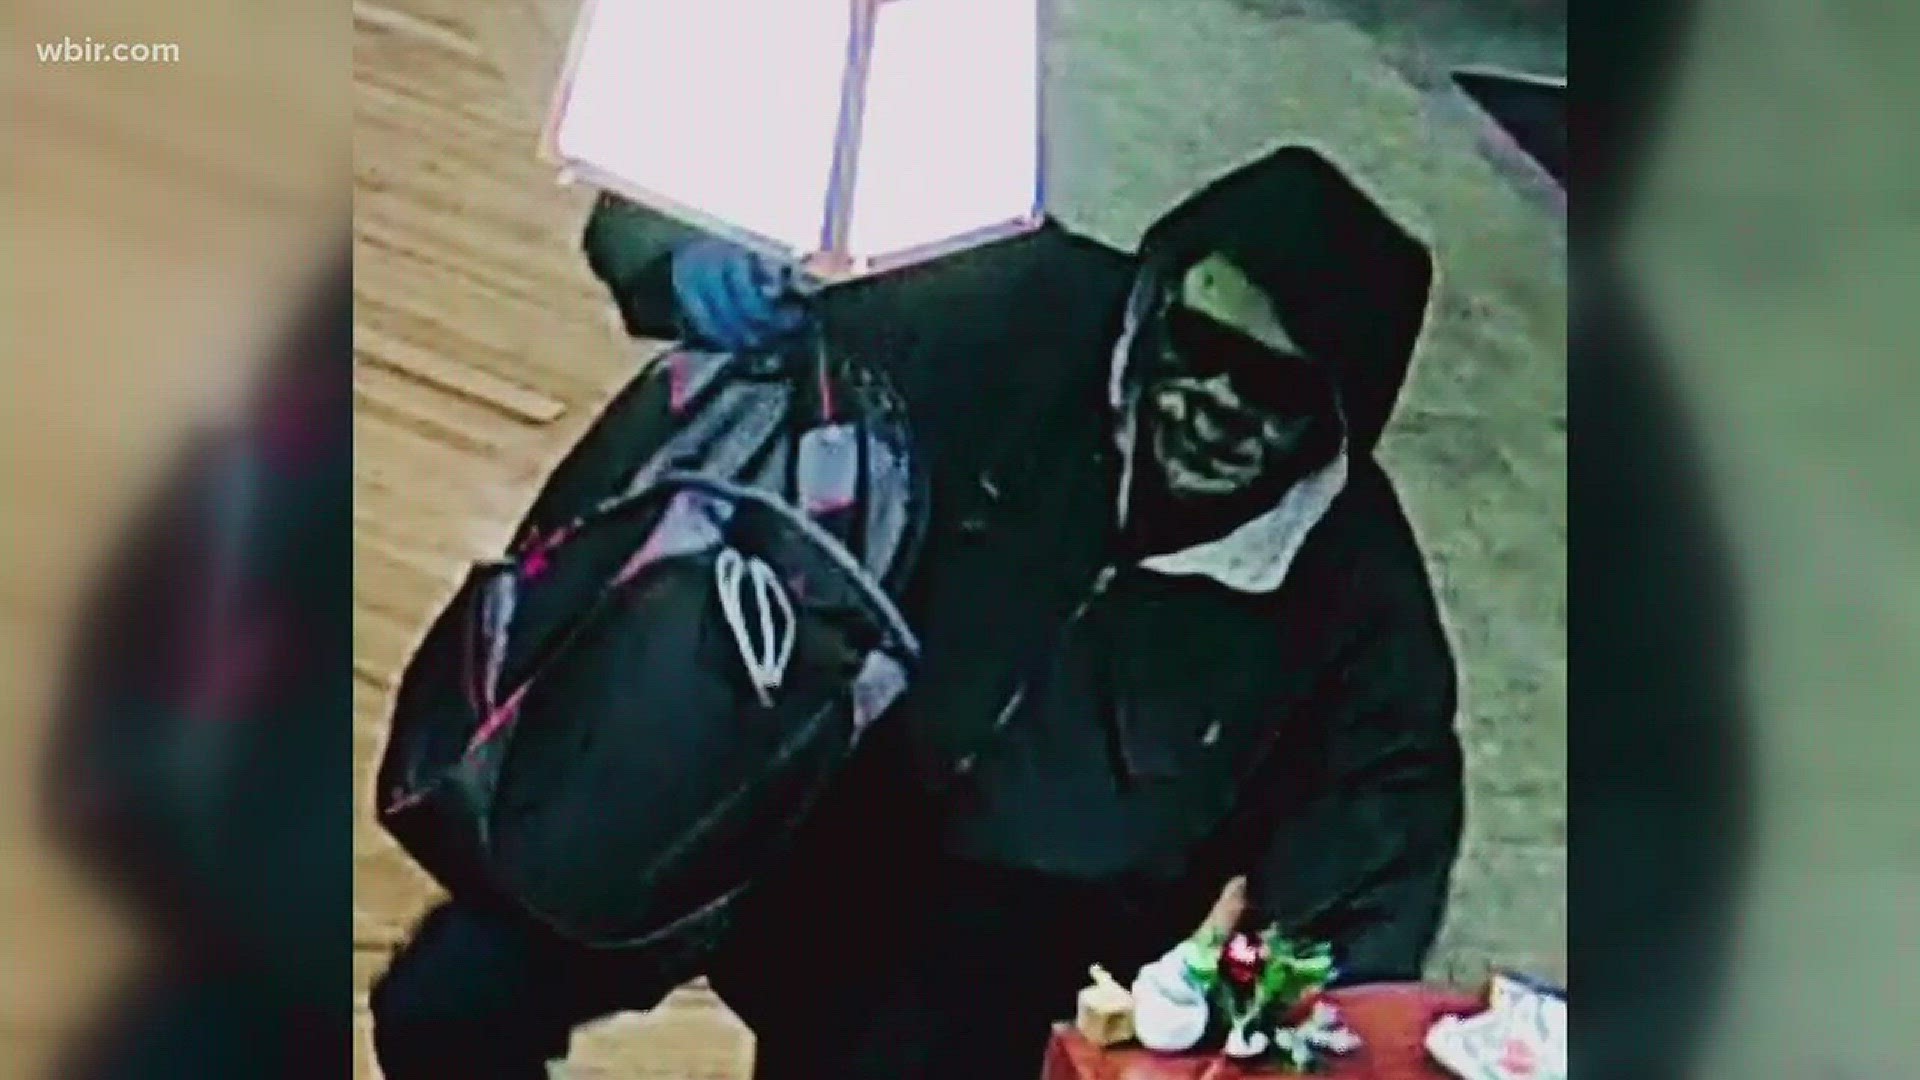 Nov. 24, 2017: The FBI needs help finding the person who robbed an East Knoxville bank.